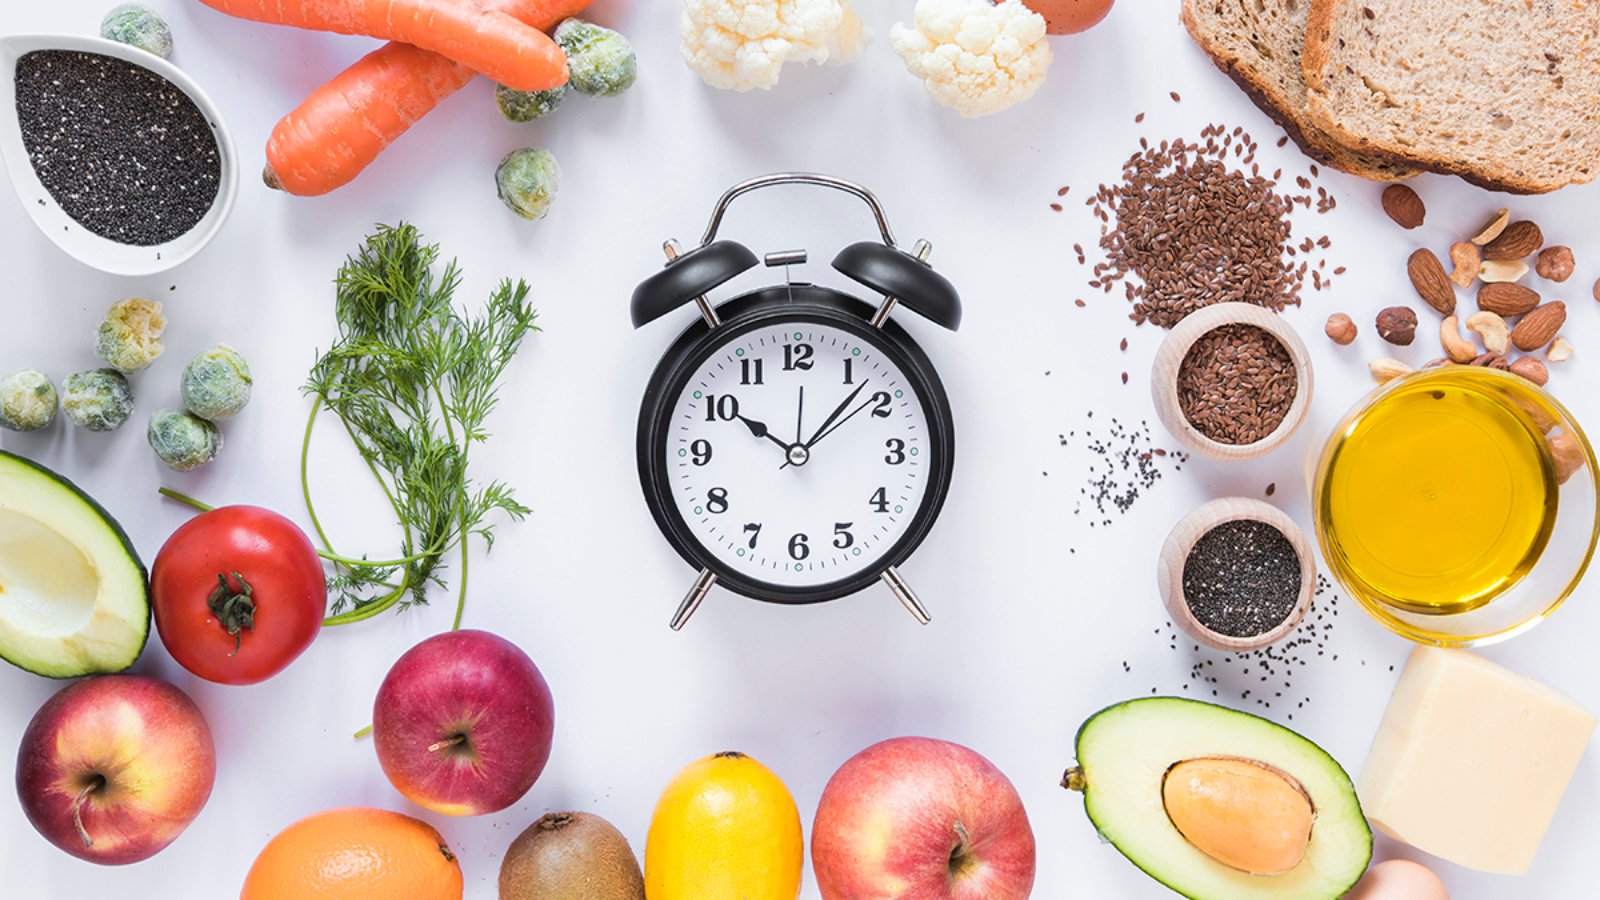 variety-ingredients-with-alarm-clock-arranged-against-isolated-white-background